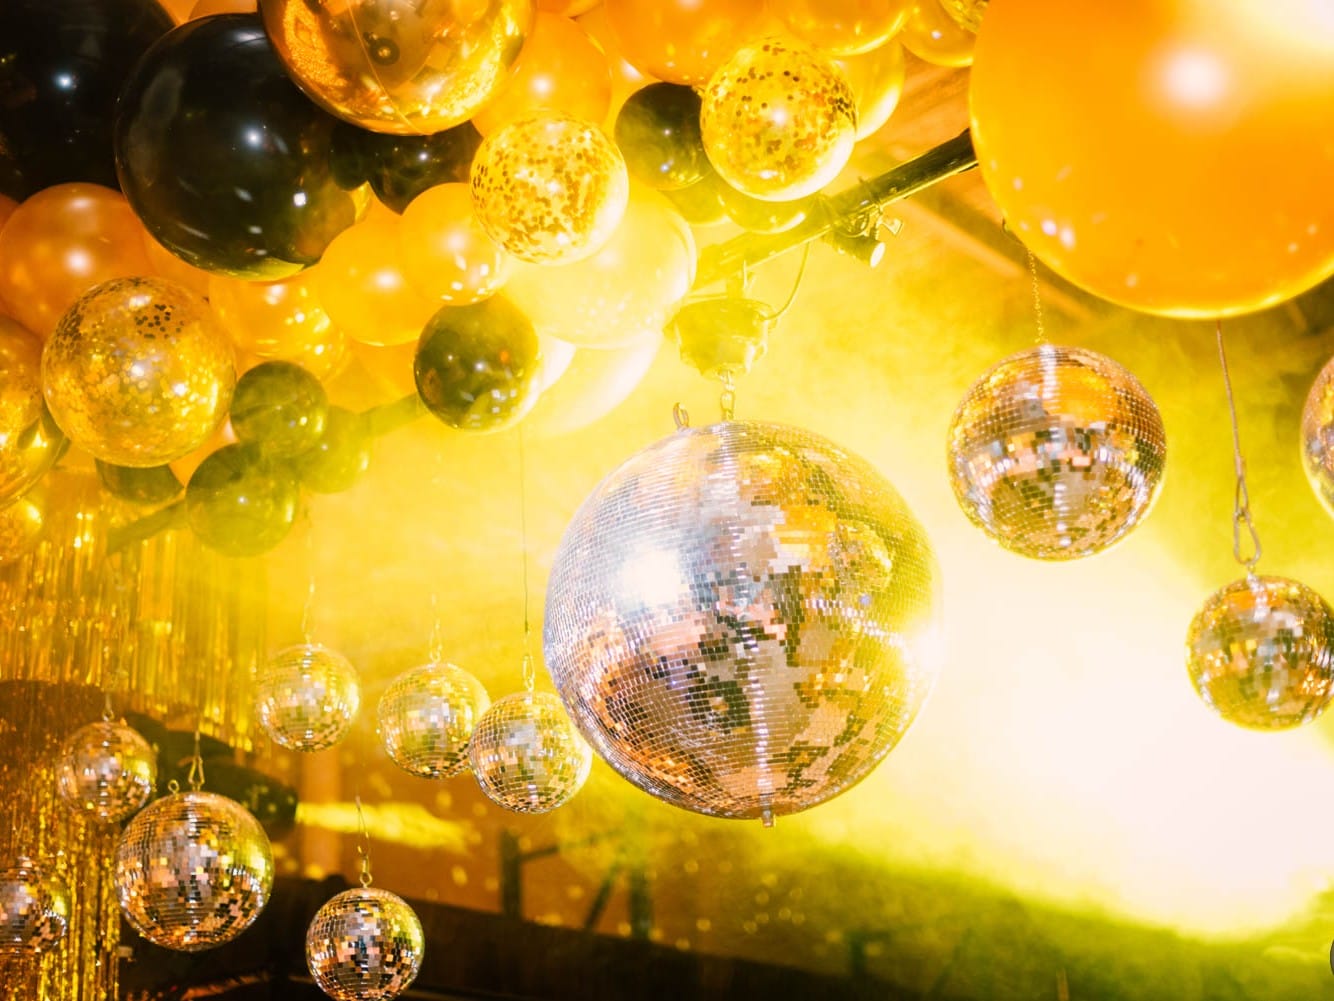 studio 54 themed party with silver mirror balls